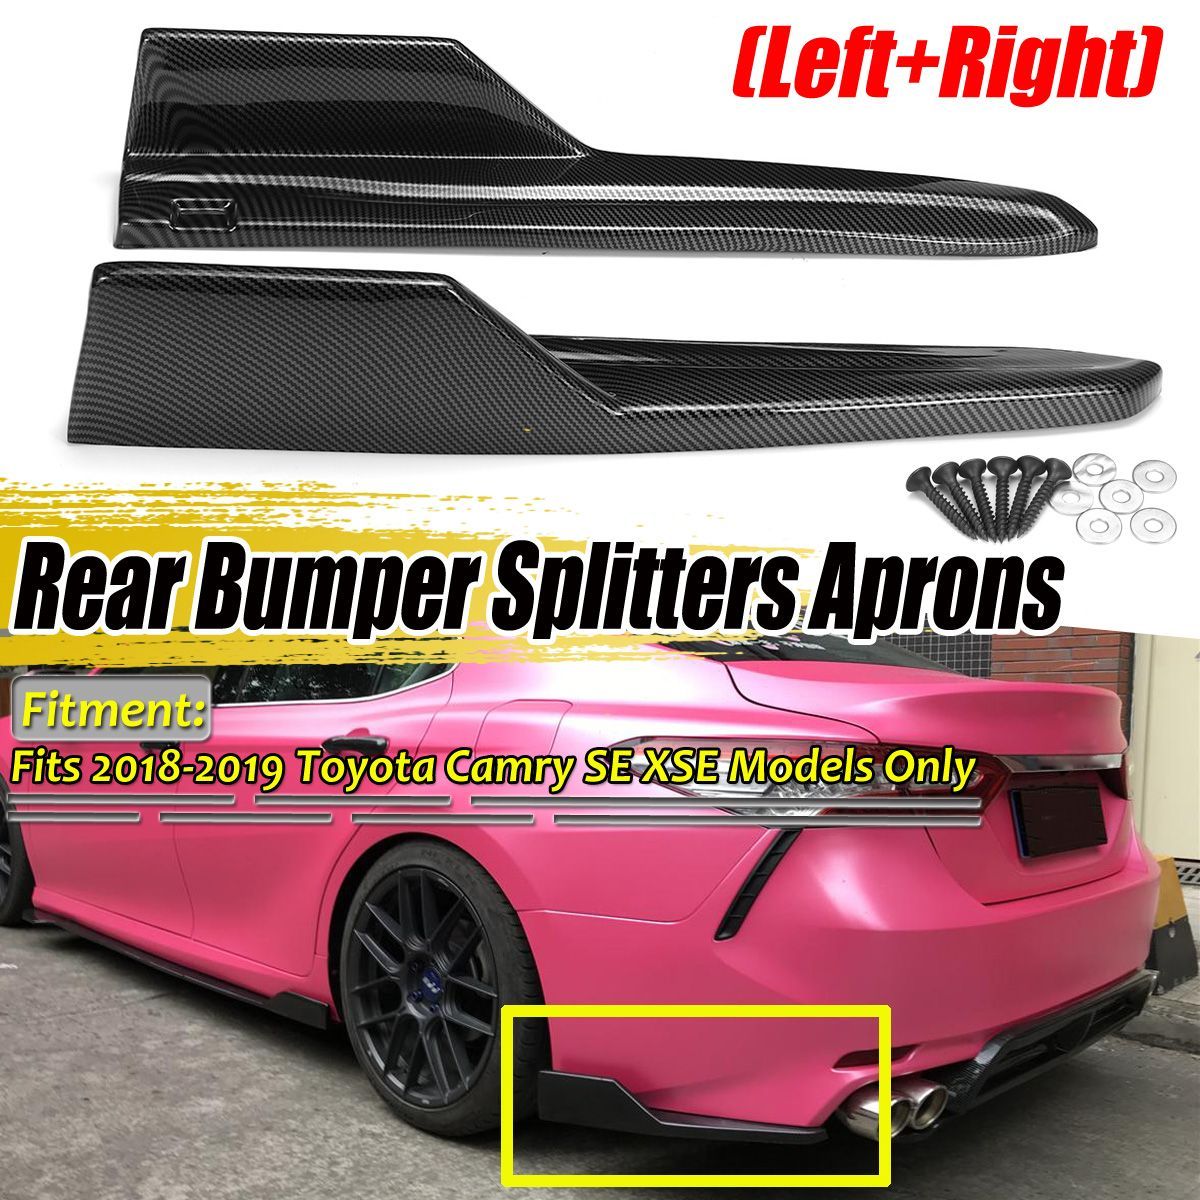 Carbon-Fiber-Look-Rear-Bumper-Side-Corner-Spats-Apons-For-Toyota-Camry-2018-1720157